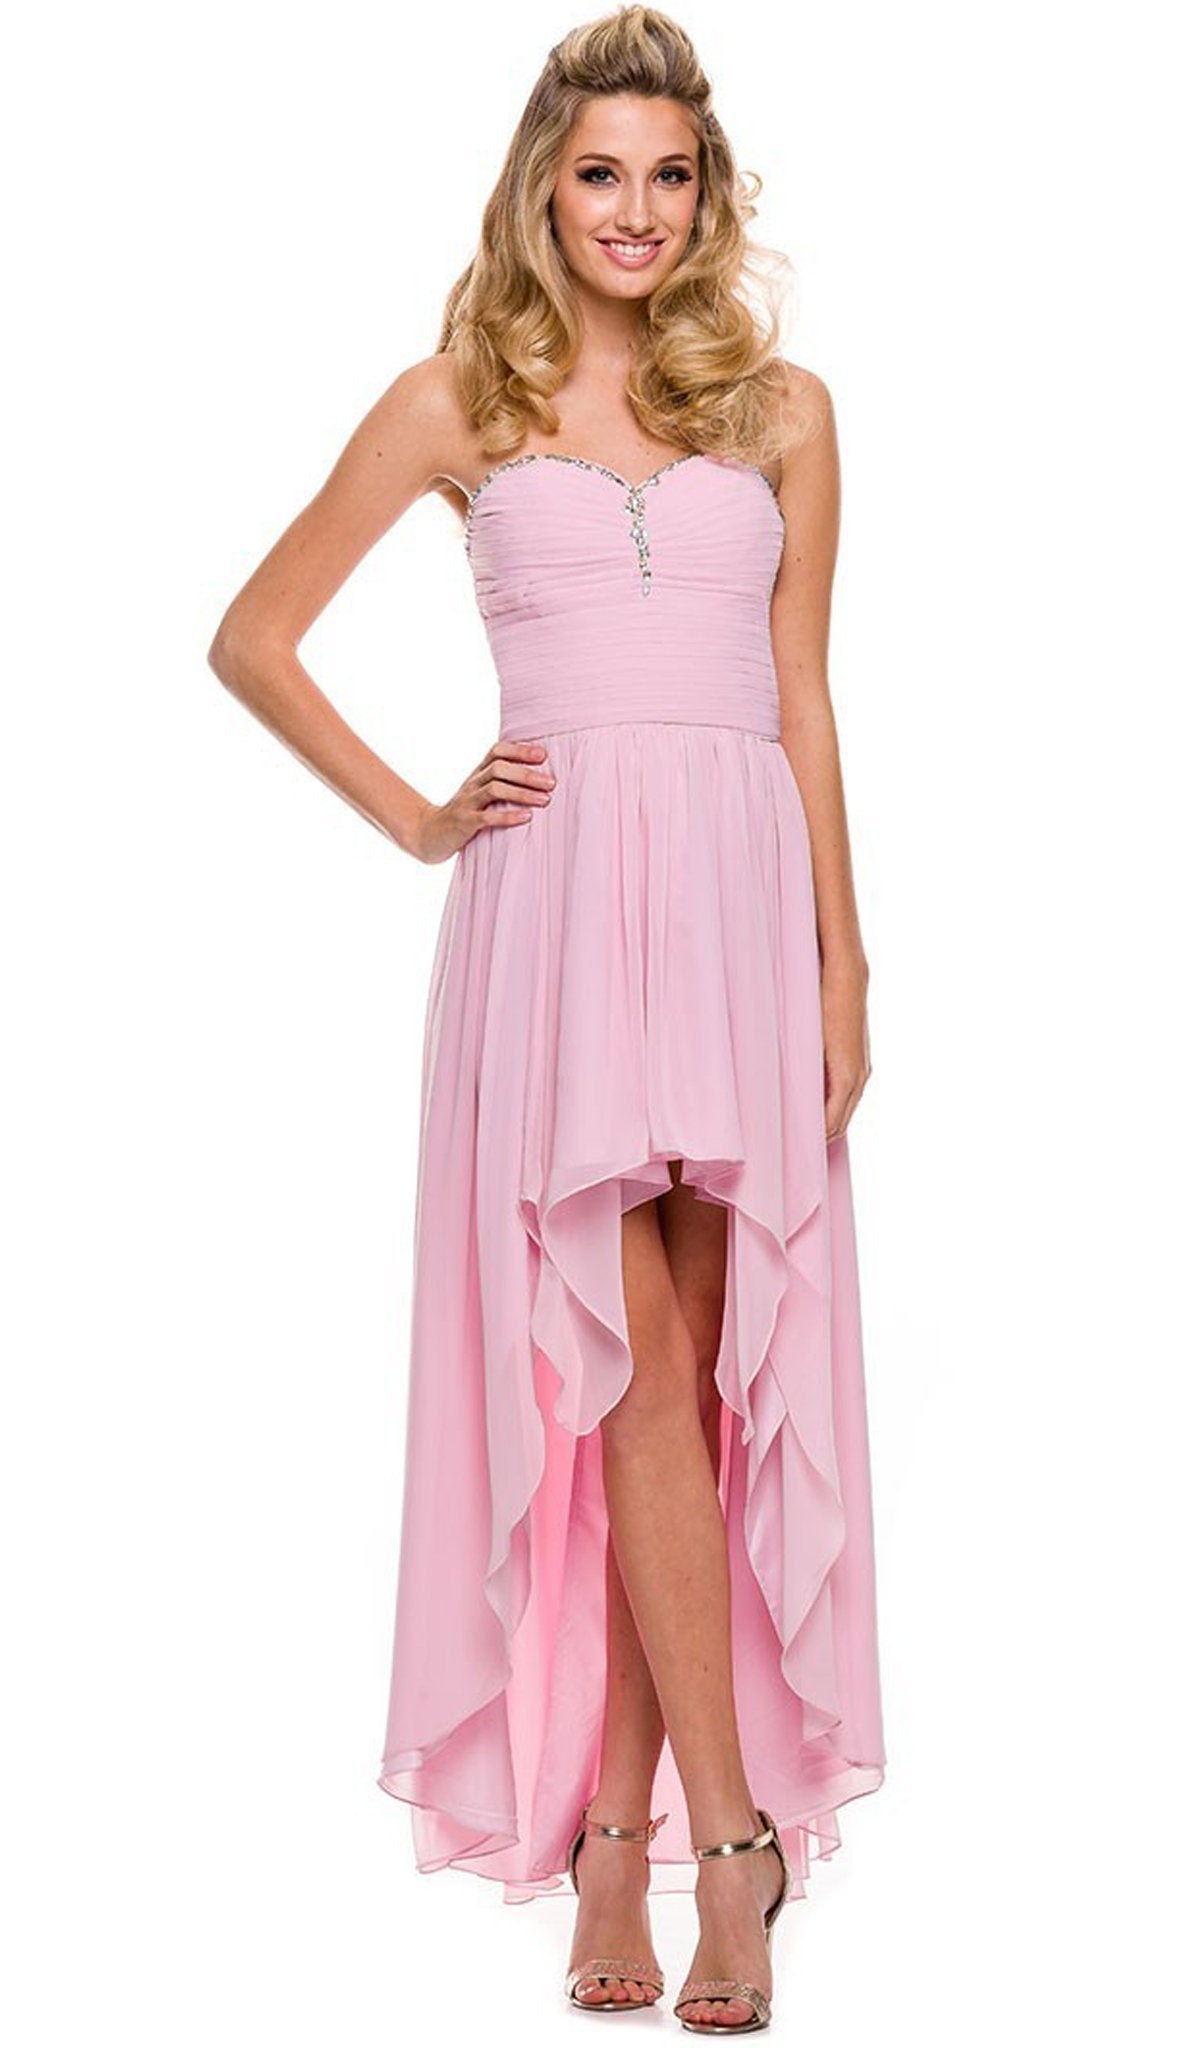 Nox Anabel - 2699 Strapless Ruched High Low Dress